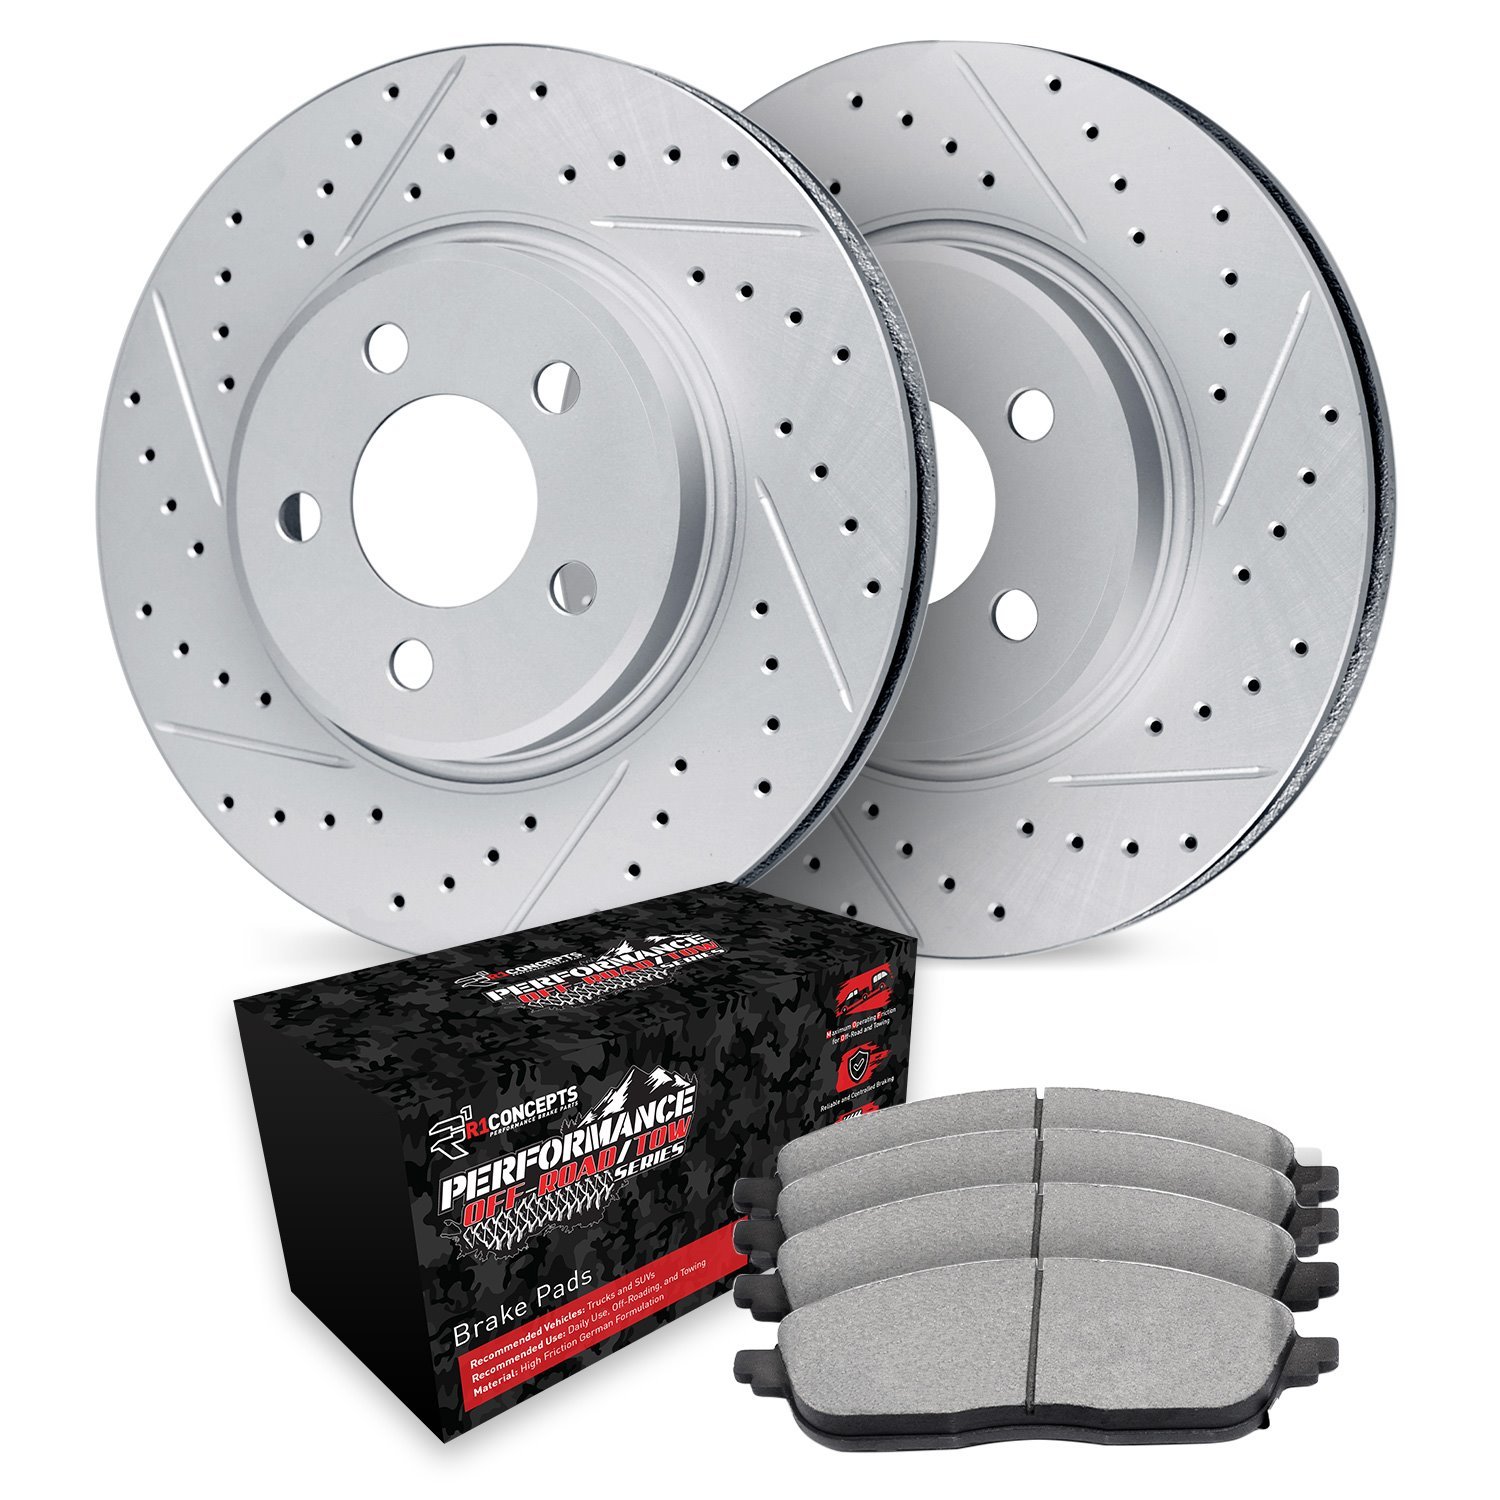 GEO-Carbon Drilled & Slotted Brake Rotor Set w/Performance Off-Road/Tow Pads, Fits Select Fits Multiple Makes/Models